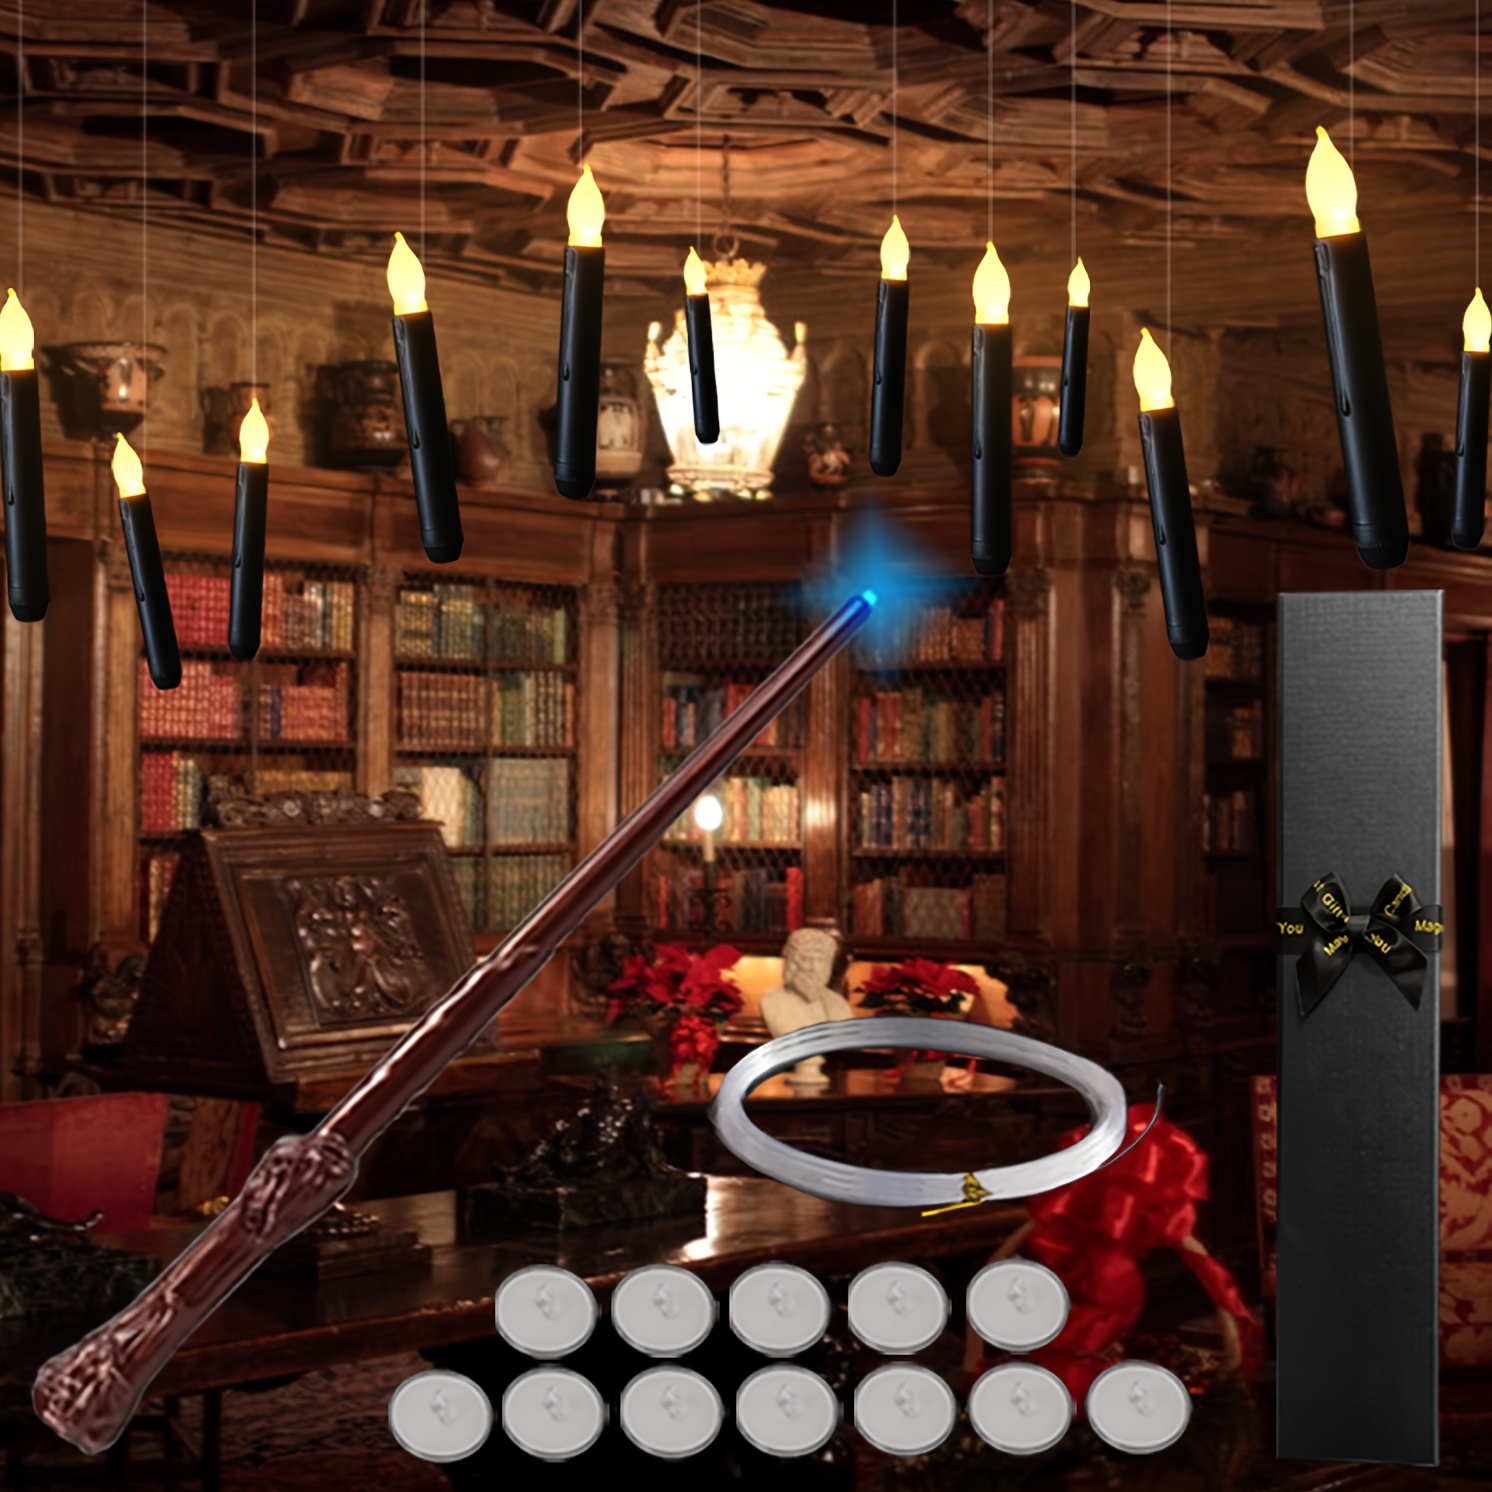 Flameless Candles With Magic Wand Remote For Halloween Decor, 6.5 Floating  Candles Battery Operated Hanging Window Candles, Flickering Electric LED C